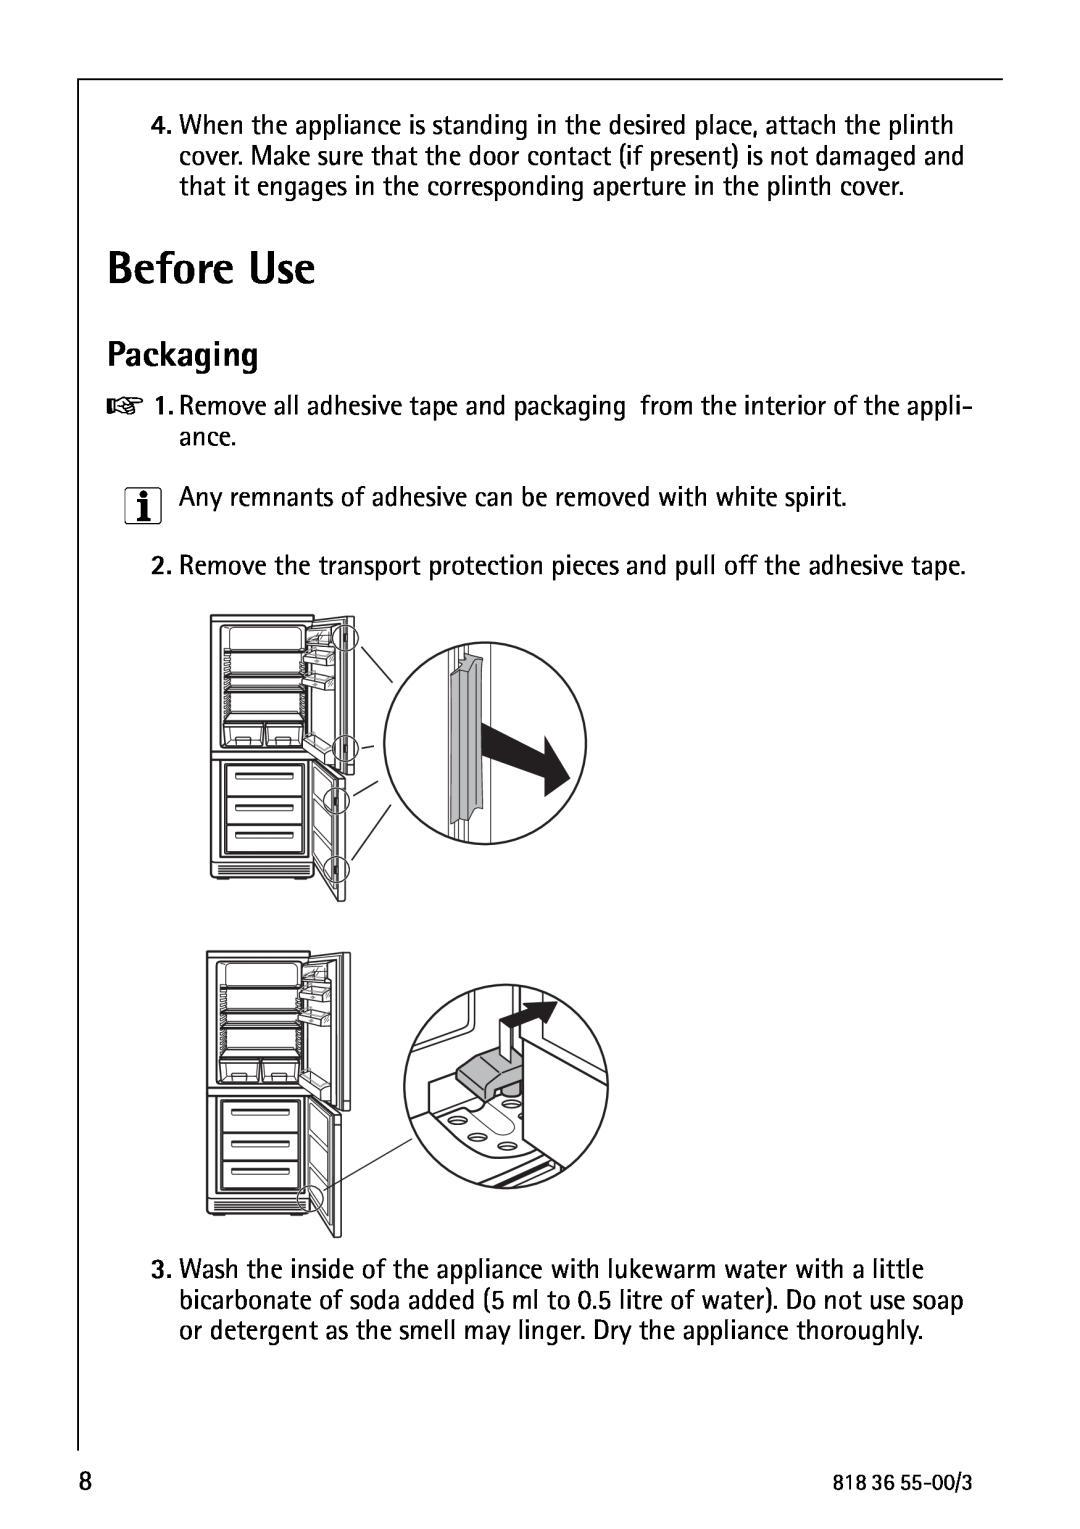 AEG 86378-KG operating instructions Before Use, Packaging 